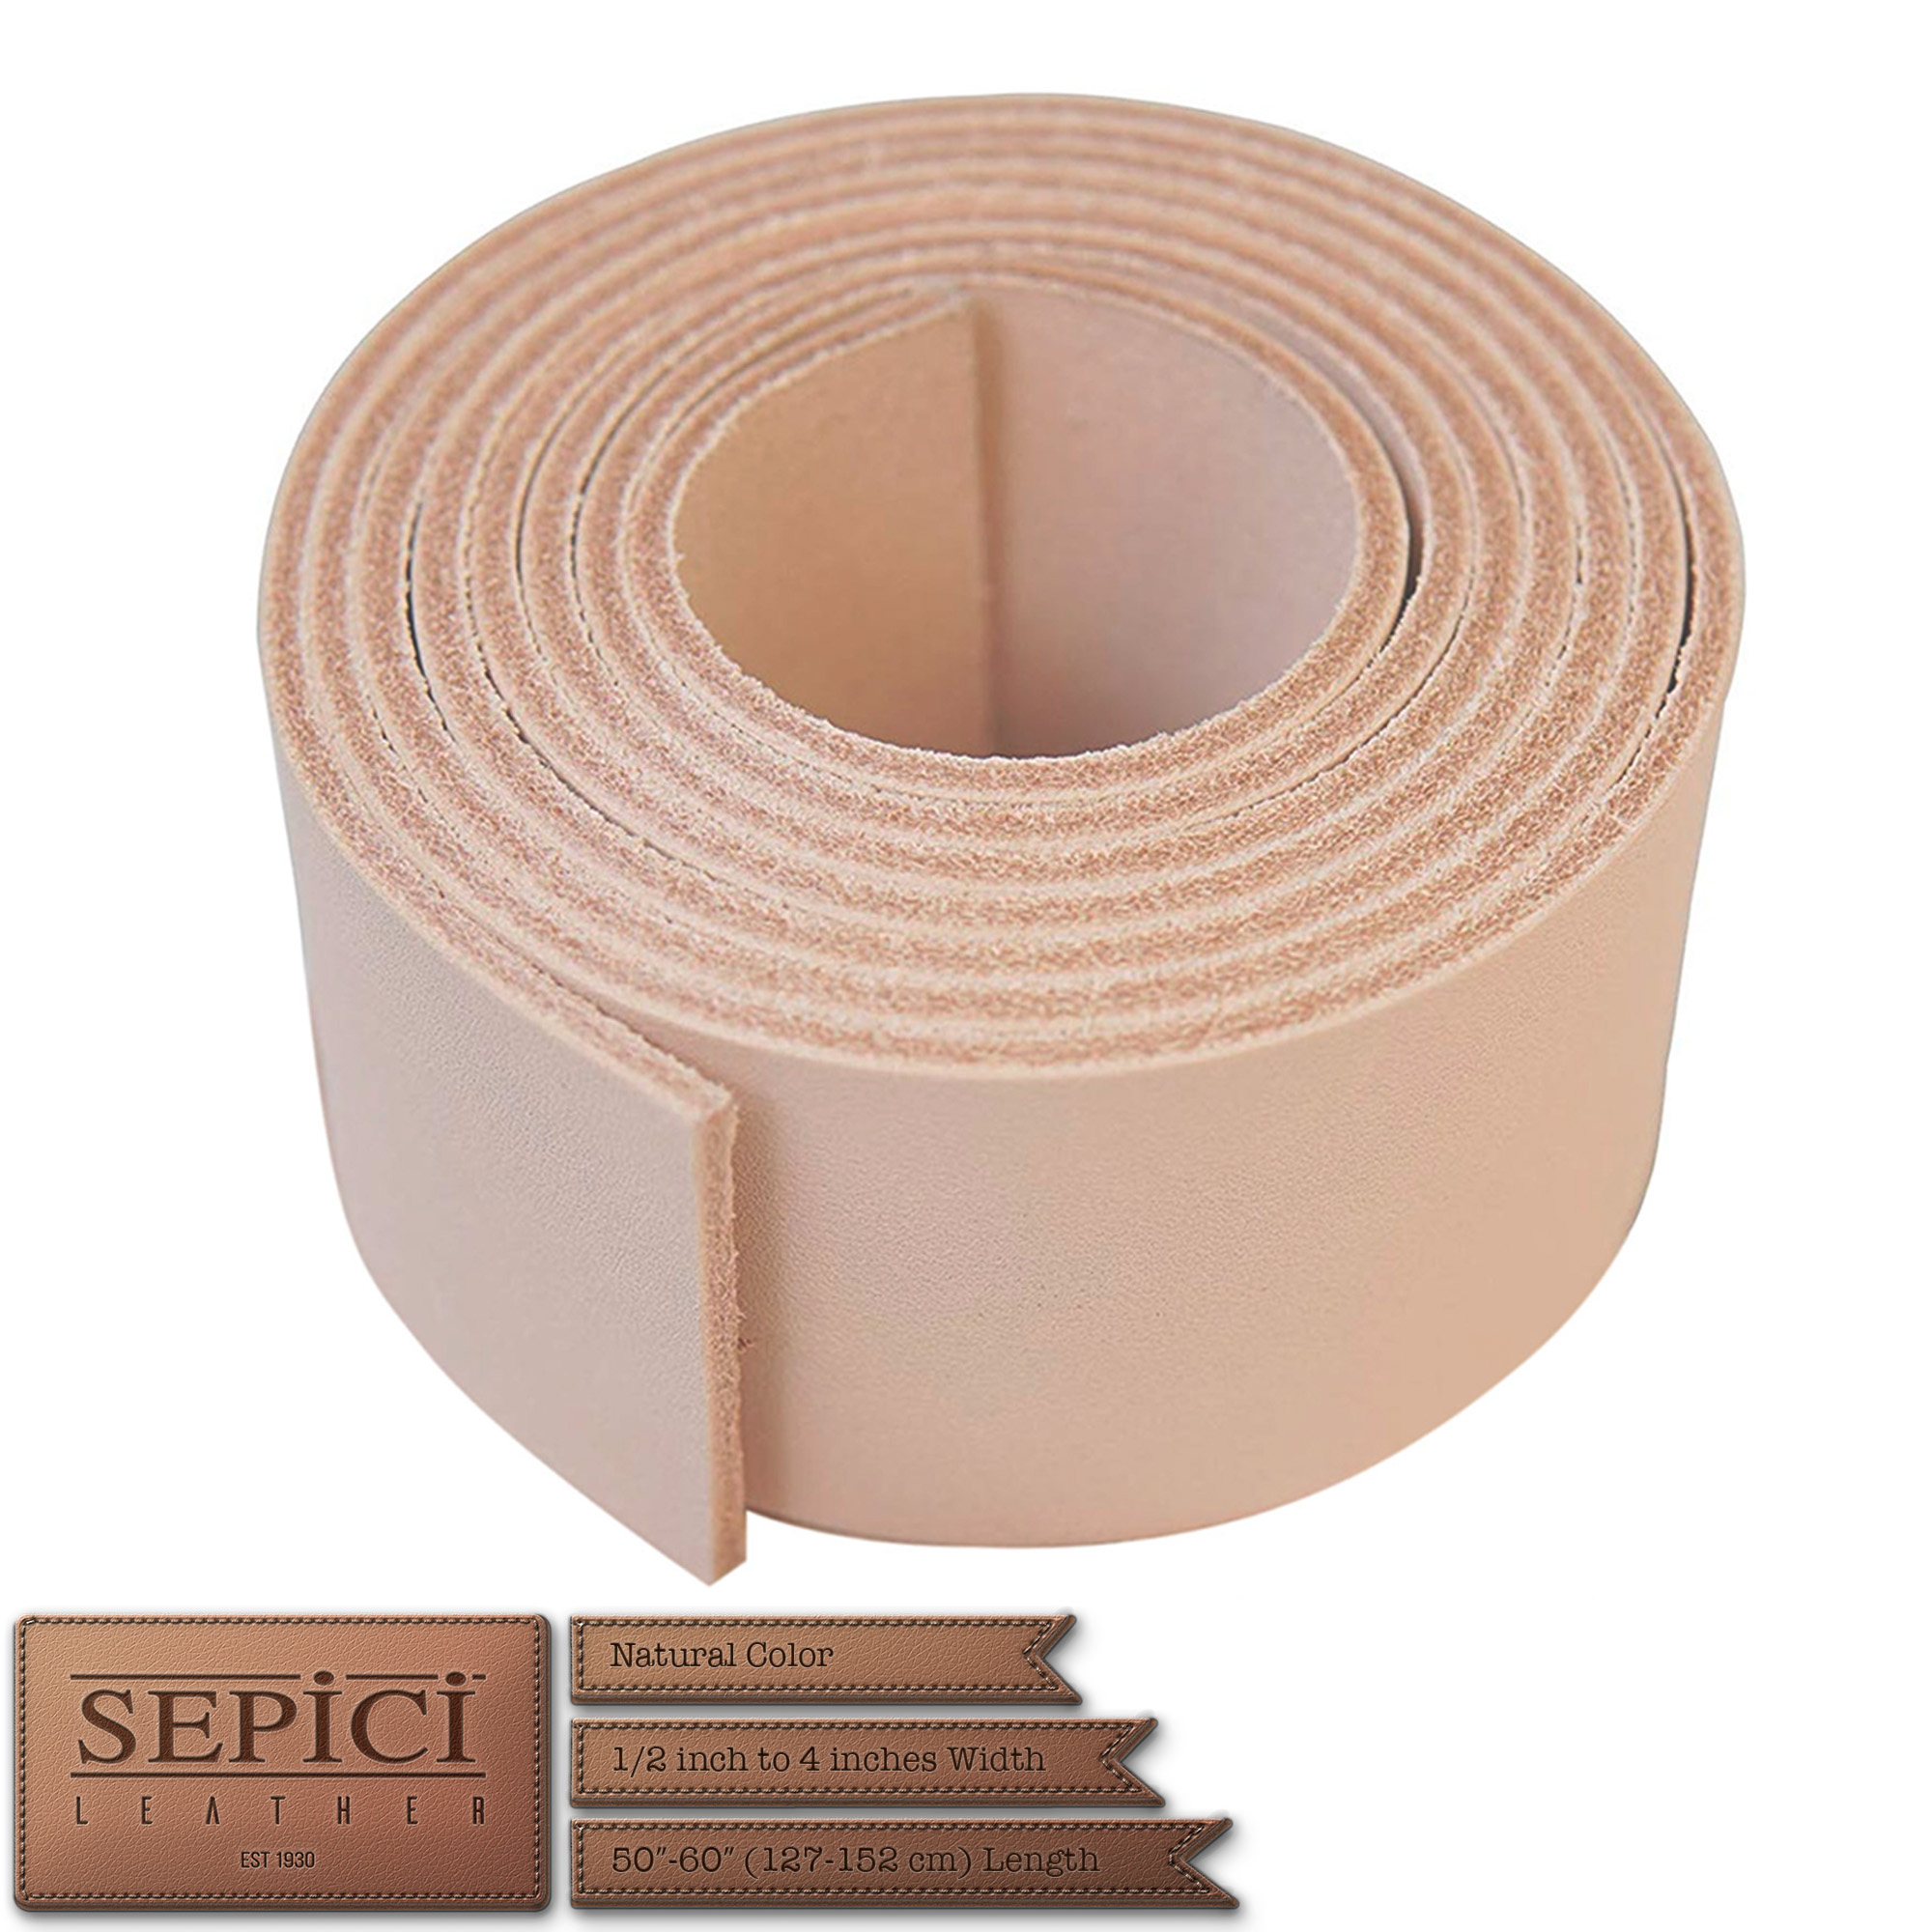 4 x 55 Import Tooling Leather 9/10 oz Natural Belt Blanks/Strips from Exclusive Vegetable Tanned Leather by Sepici Tannery 